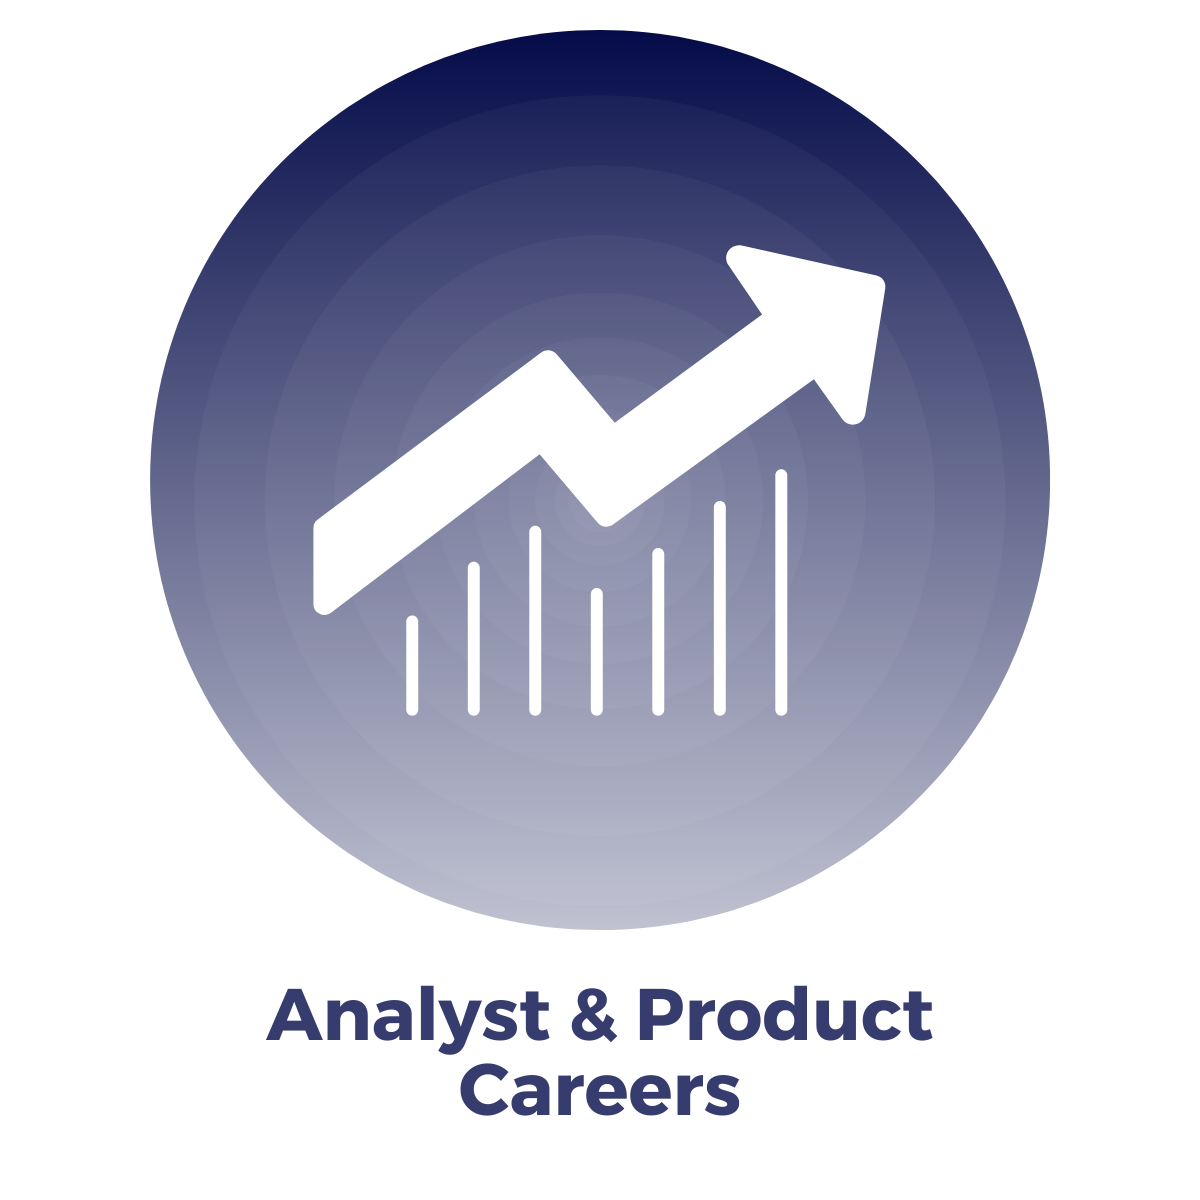 Analyst & Product Careers (1)